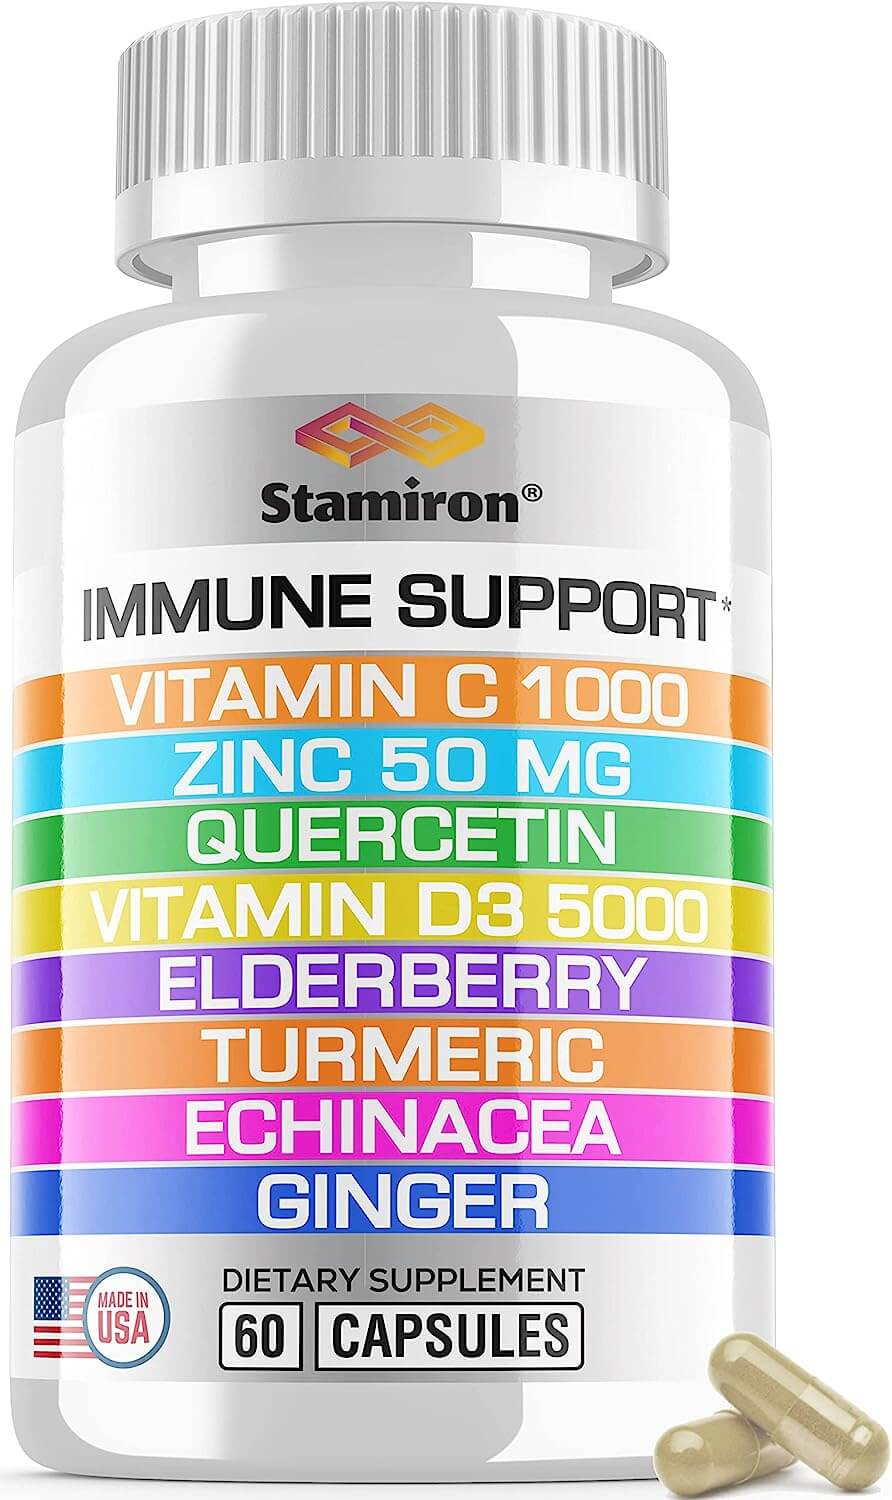 Immune Support with Quercetin Zinc 50mg